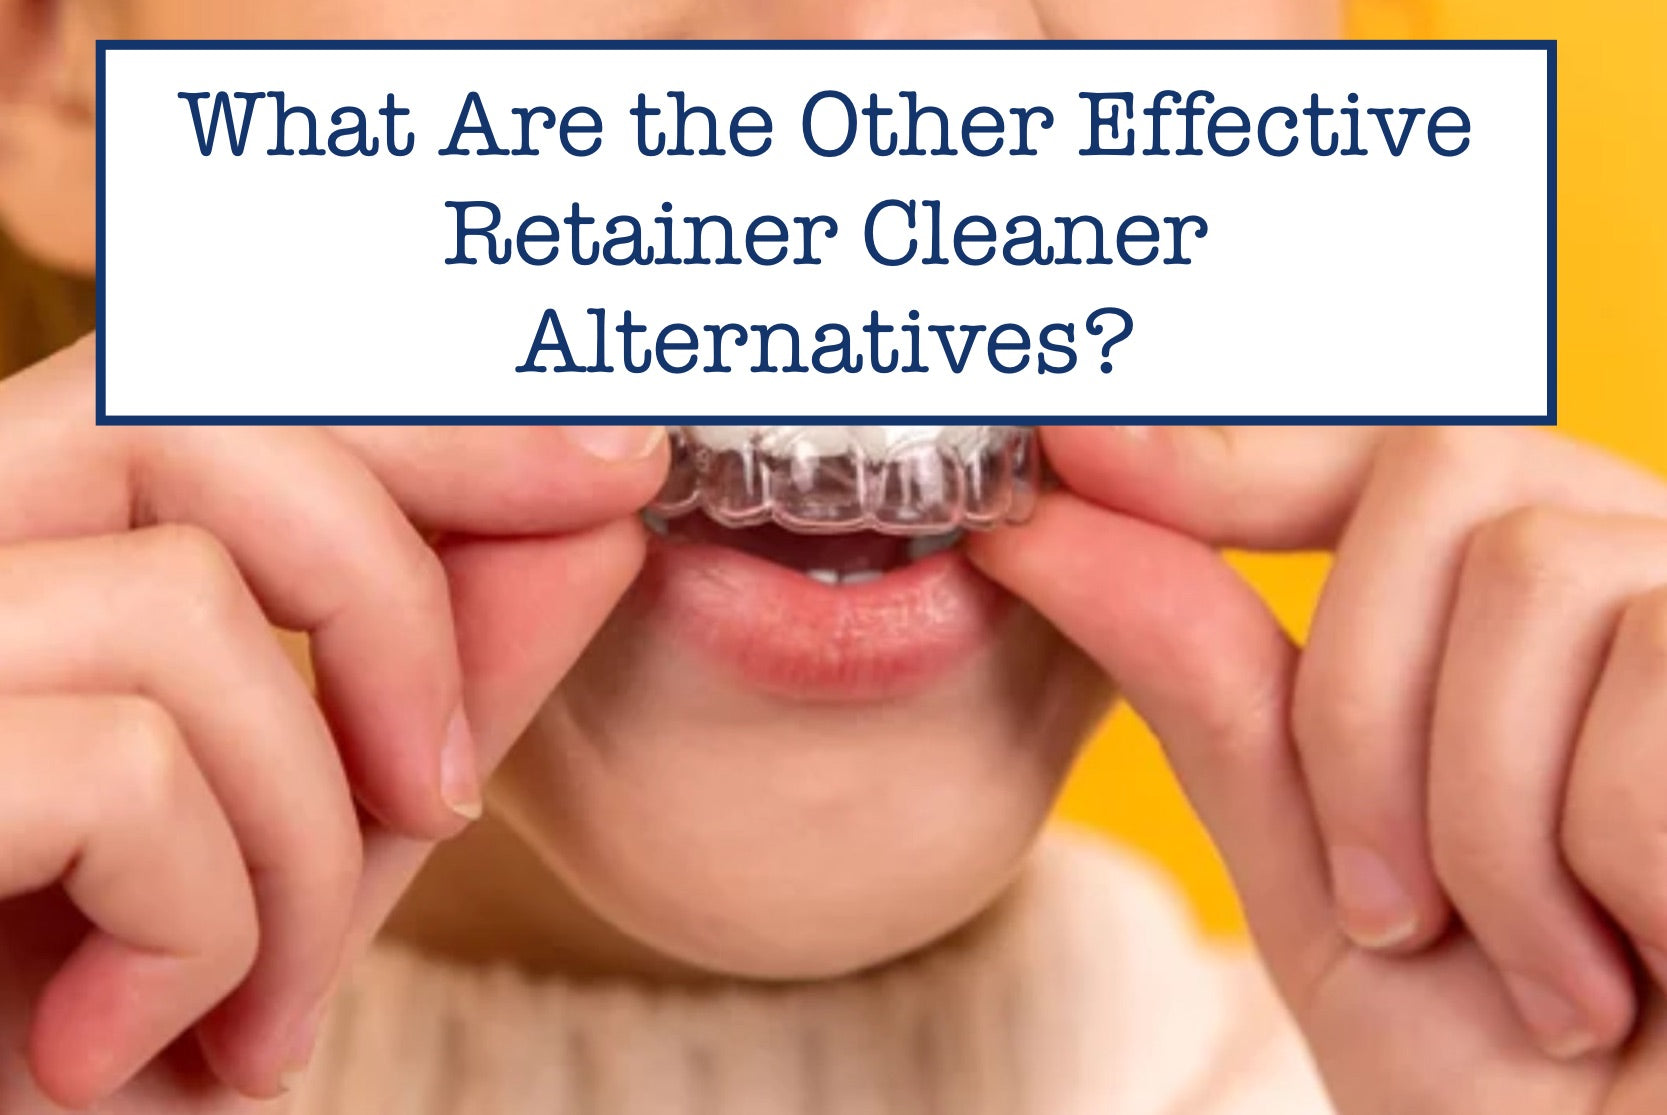 What Are the Other Effective Retainer Cleaner Alternatives?